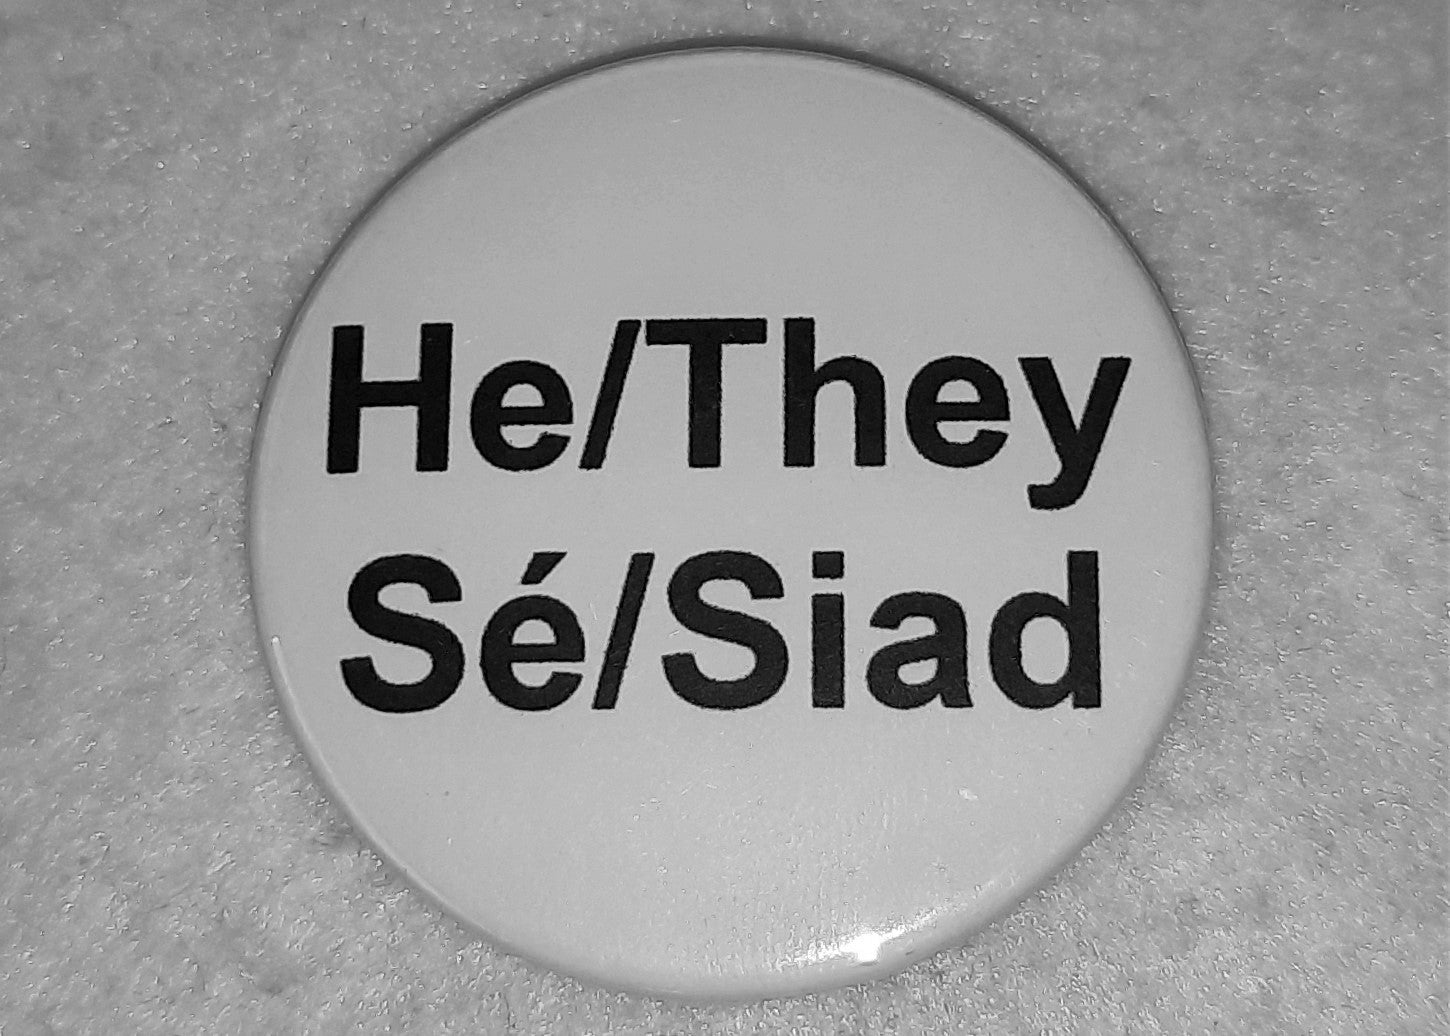 He/They & Sé/Siad Pronoun Badge - Tully Crafts